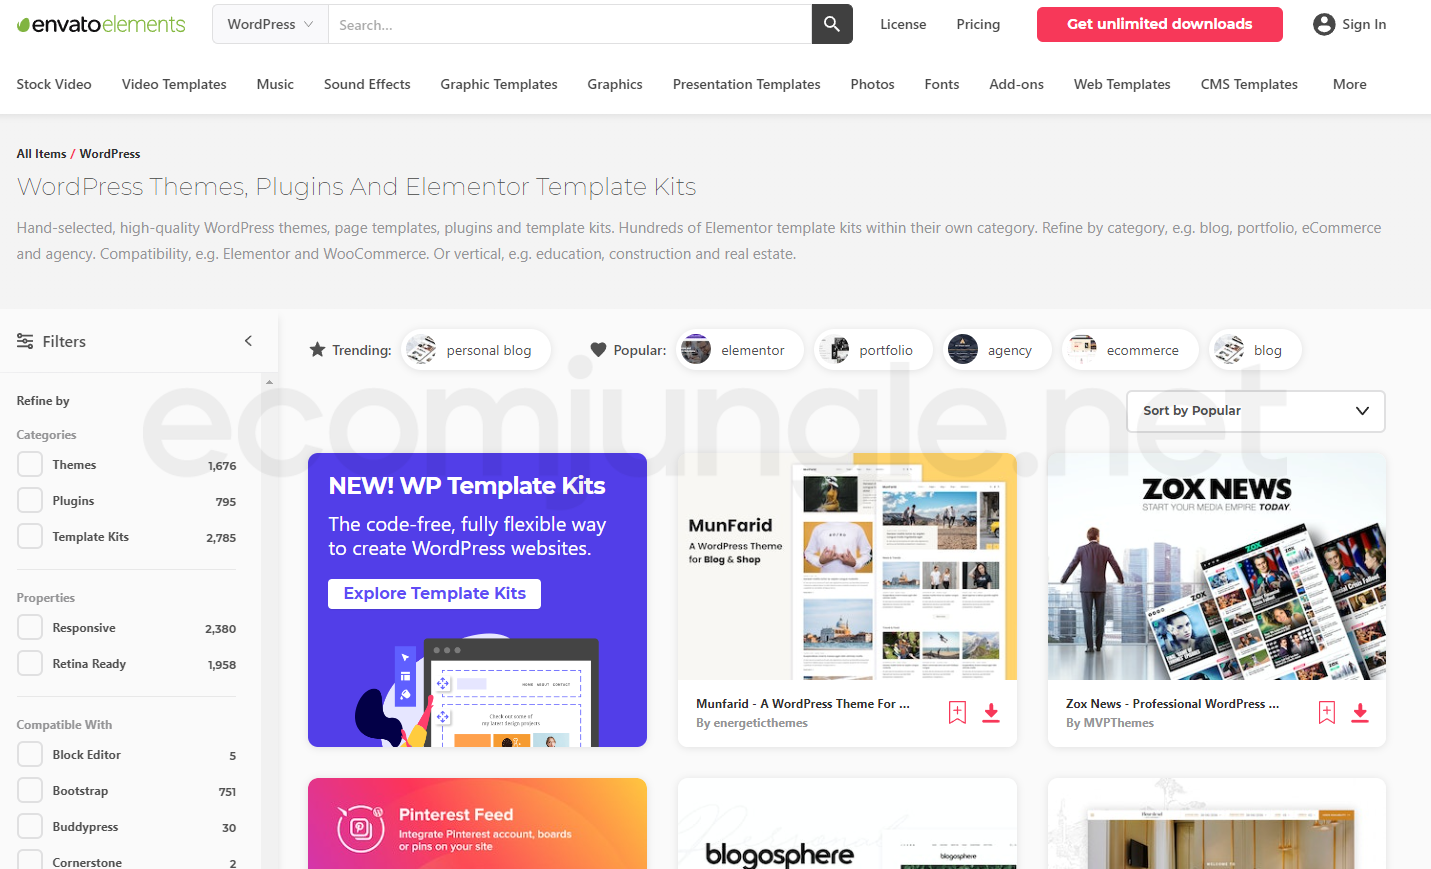 Envato Elements is a subscription service that gives you access to thousands of WordPress themes and plugins, fonts, images, and other content